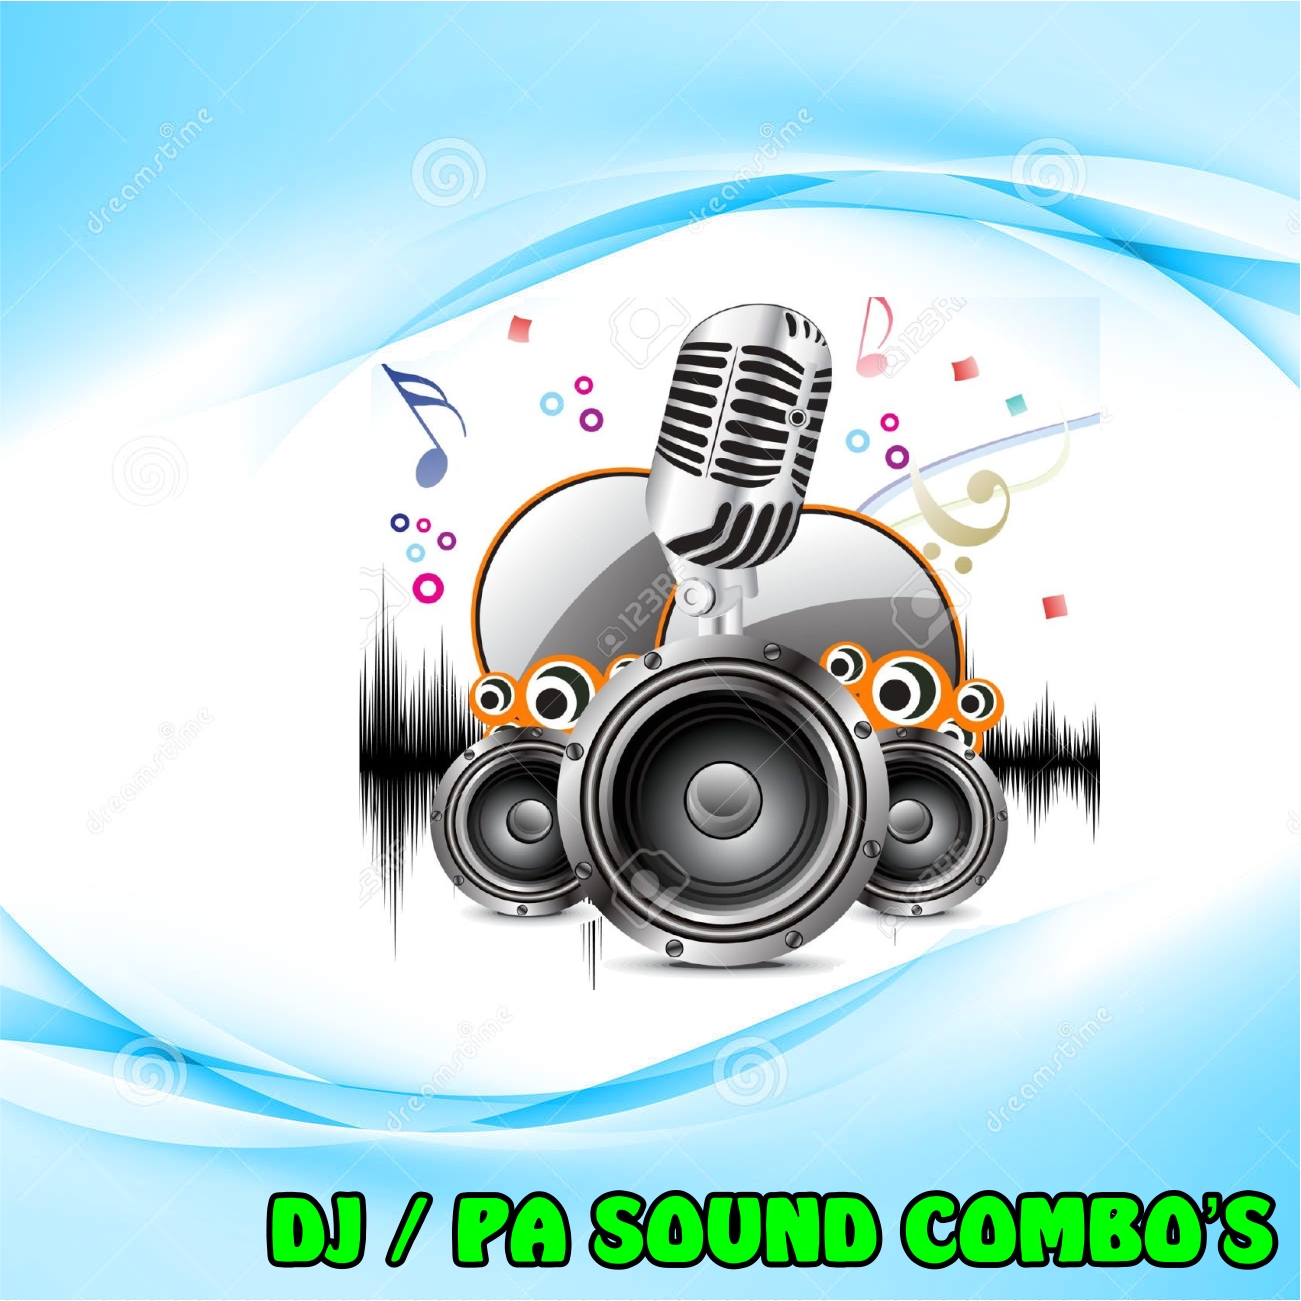 CLICK ME FOR SOUND DJ EQUIPMENT PACKAGES SOUND COMBO DJ EQUIPMENT PACKAGES EXCLUSIVE TO GRAVITY DJ STORE 0315072736